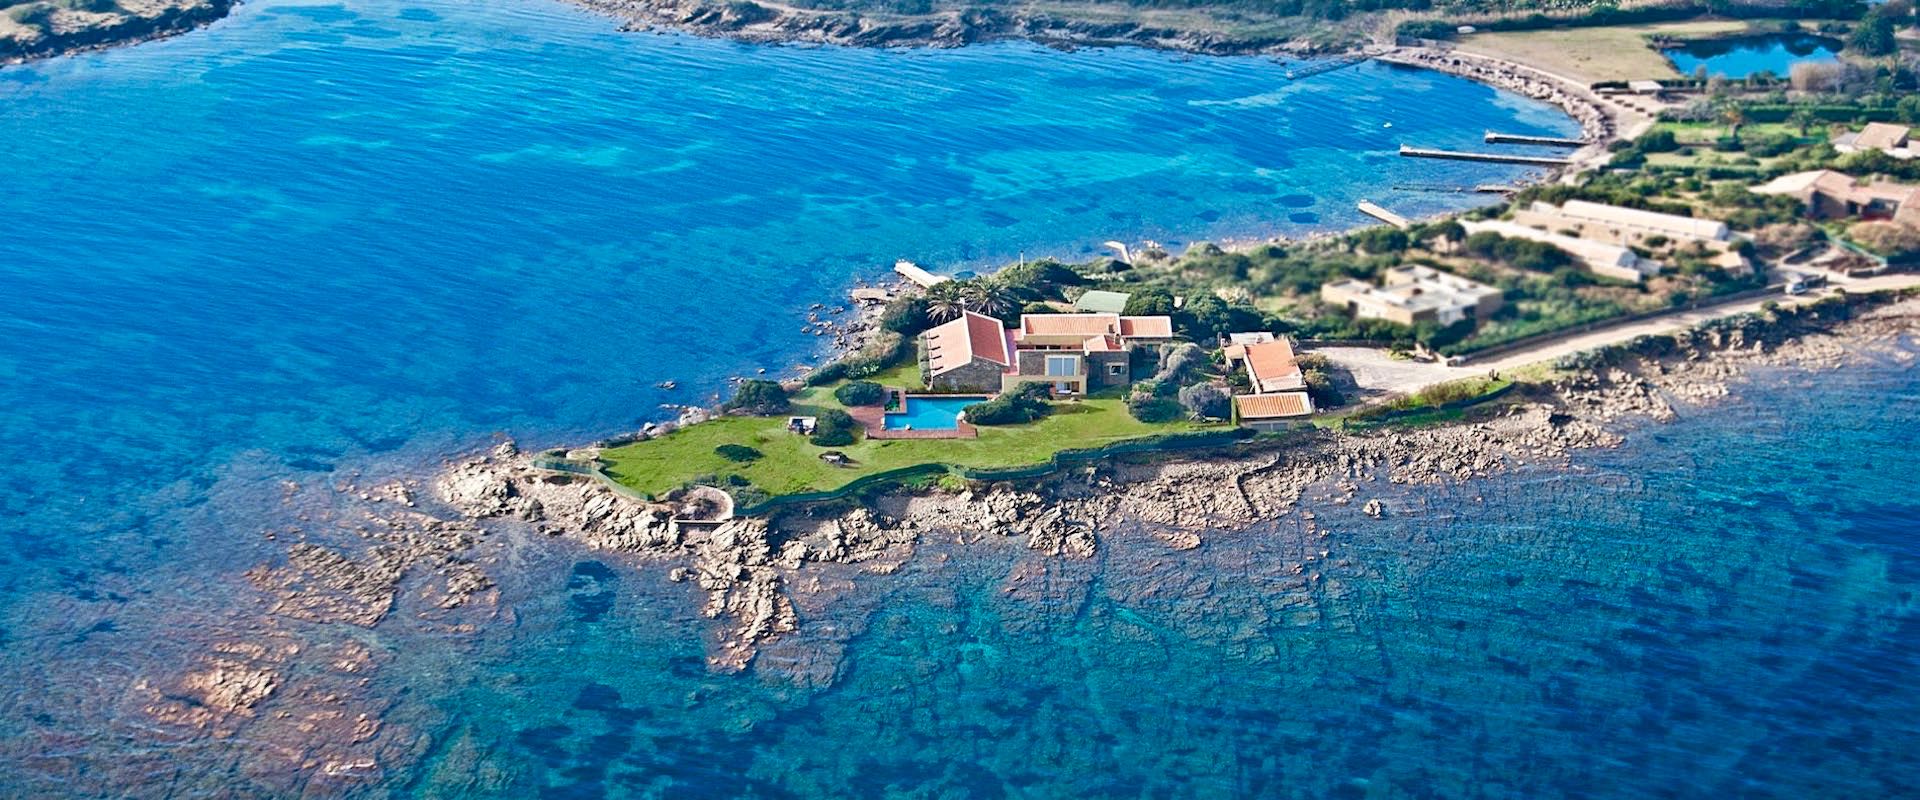 Villa silvana overview from helicopter